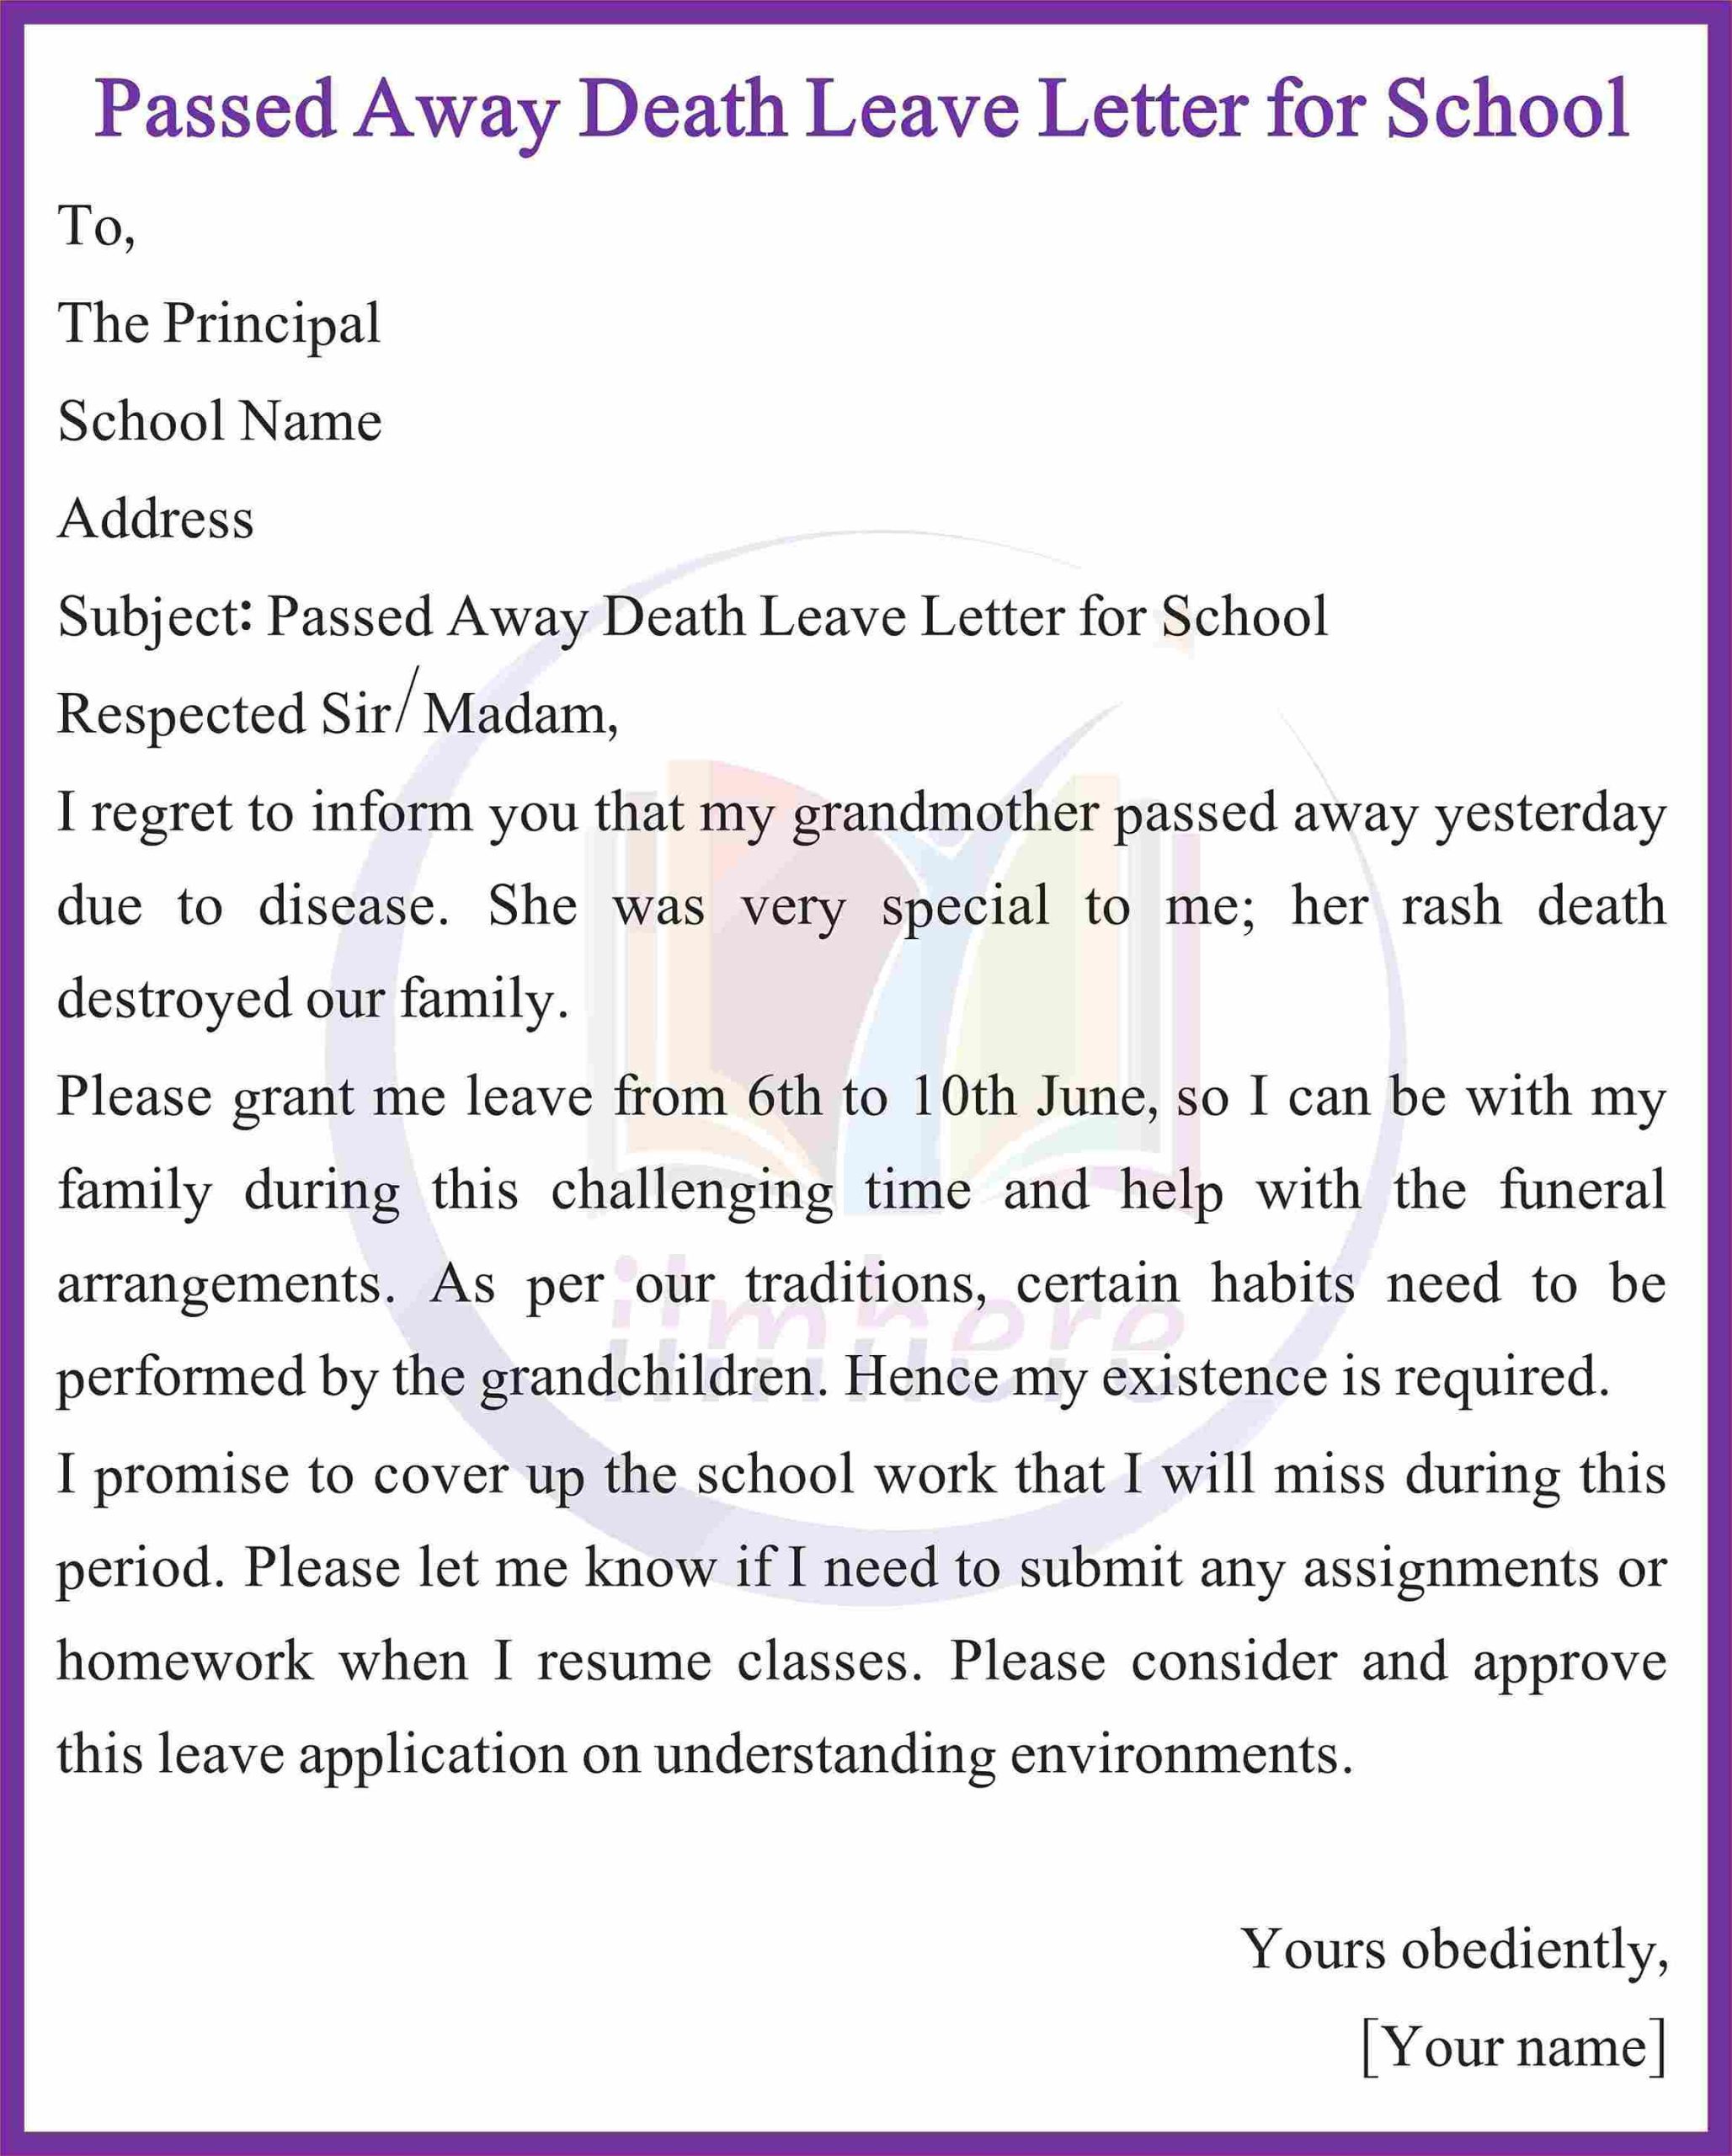 Passed Away Death Leave Letter for School